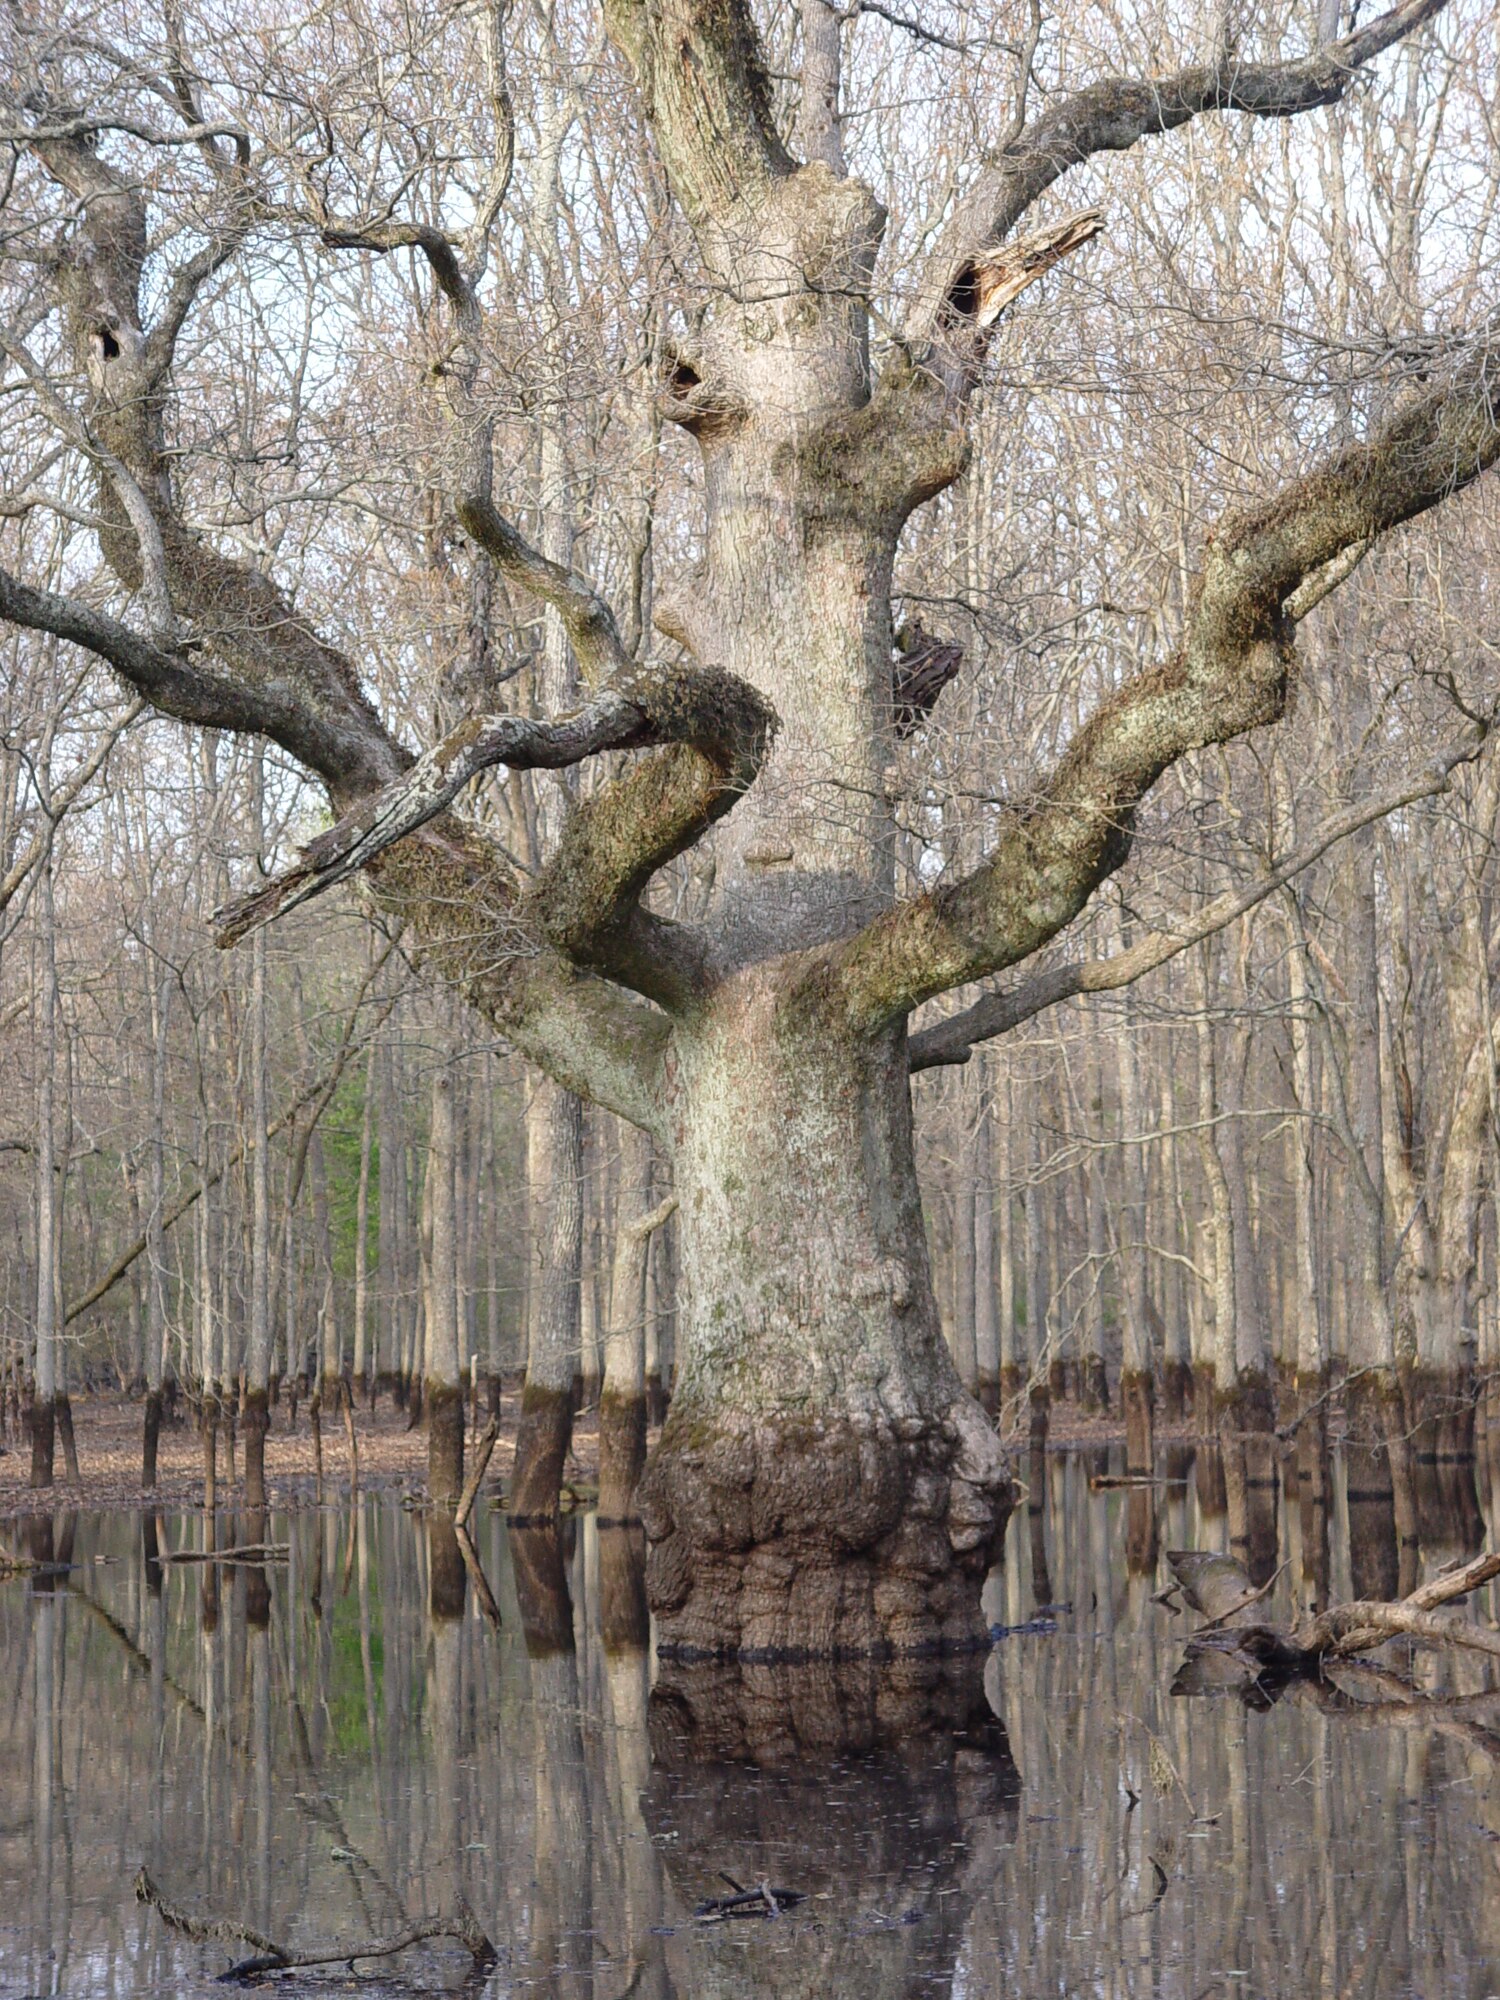 The Overcup Oak is the predominant tree found in Sinking Pond at Arnold Air Force Base, Tenn.  These trees provide an ideal habitat for Great Blue Herons to build nests, mate and form one of the largest colonies in the state.